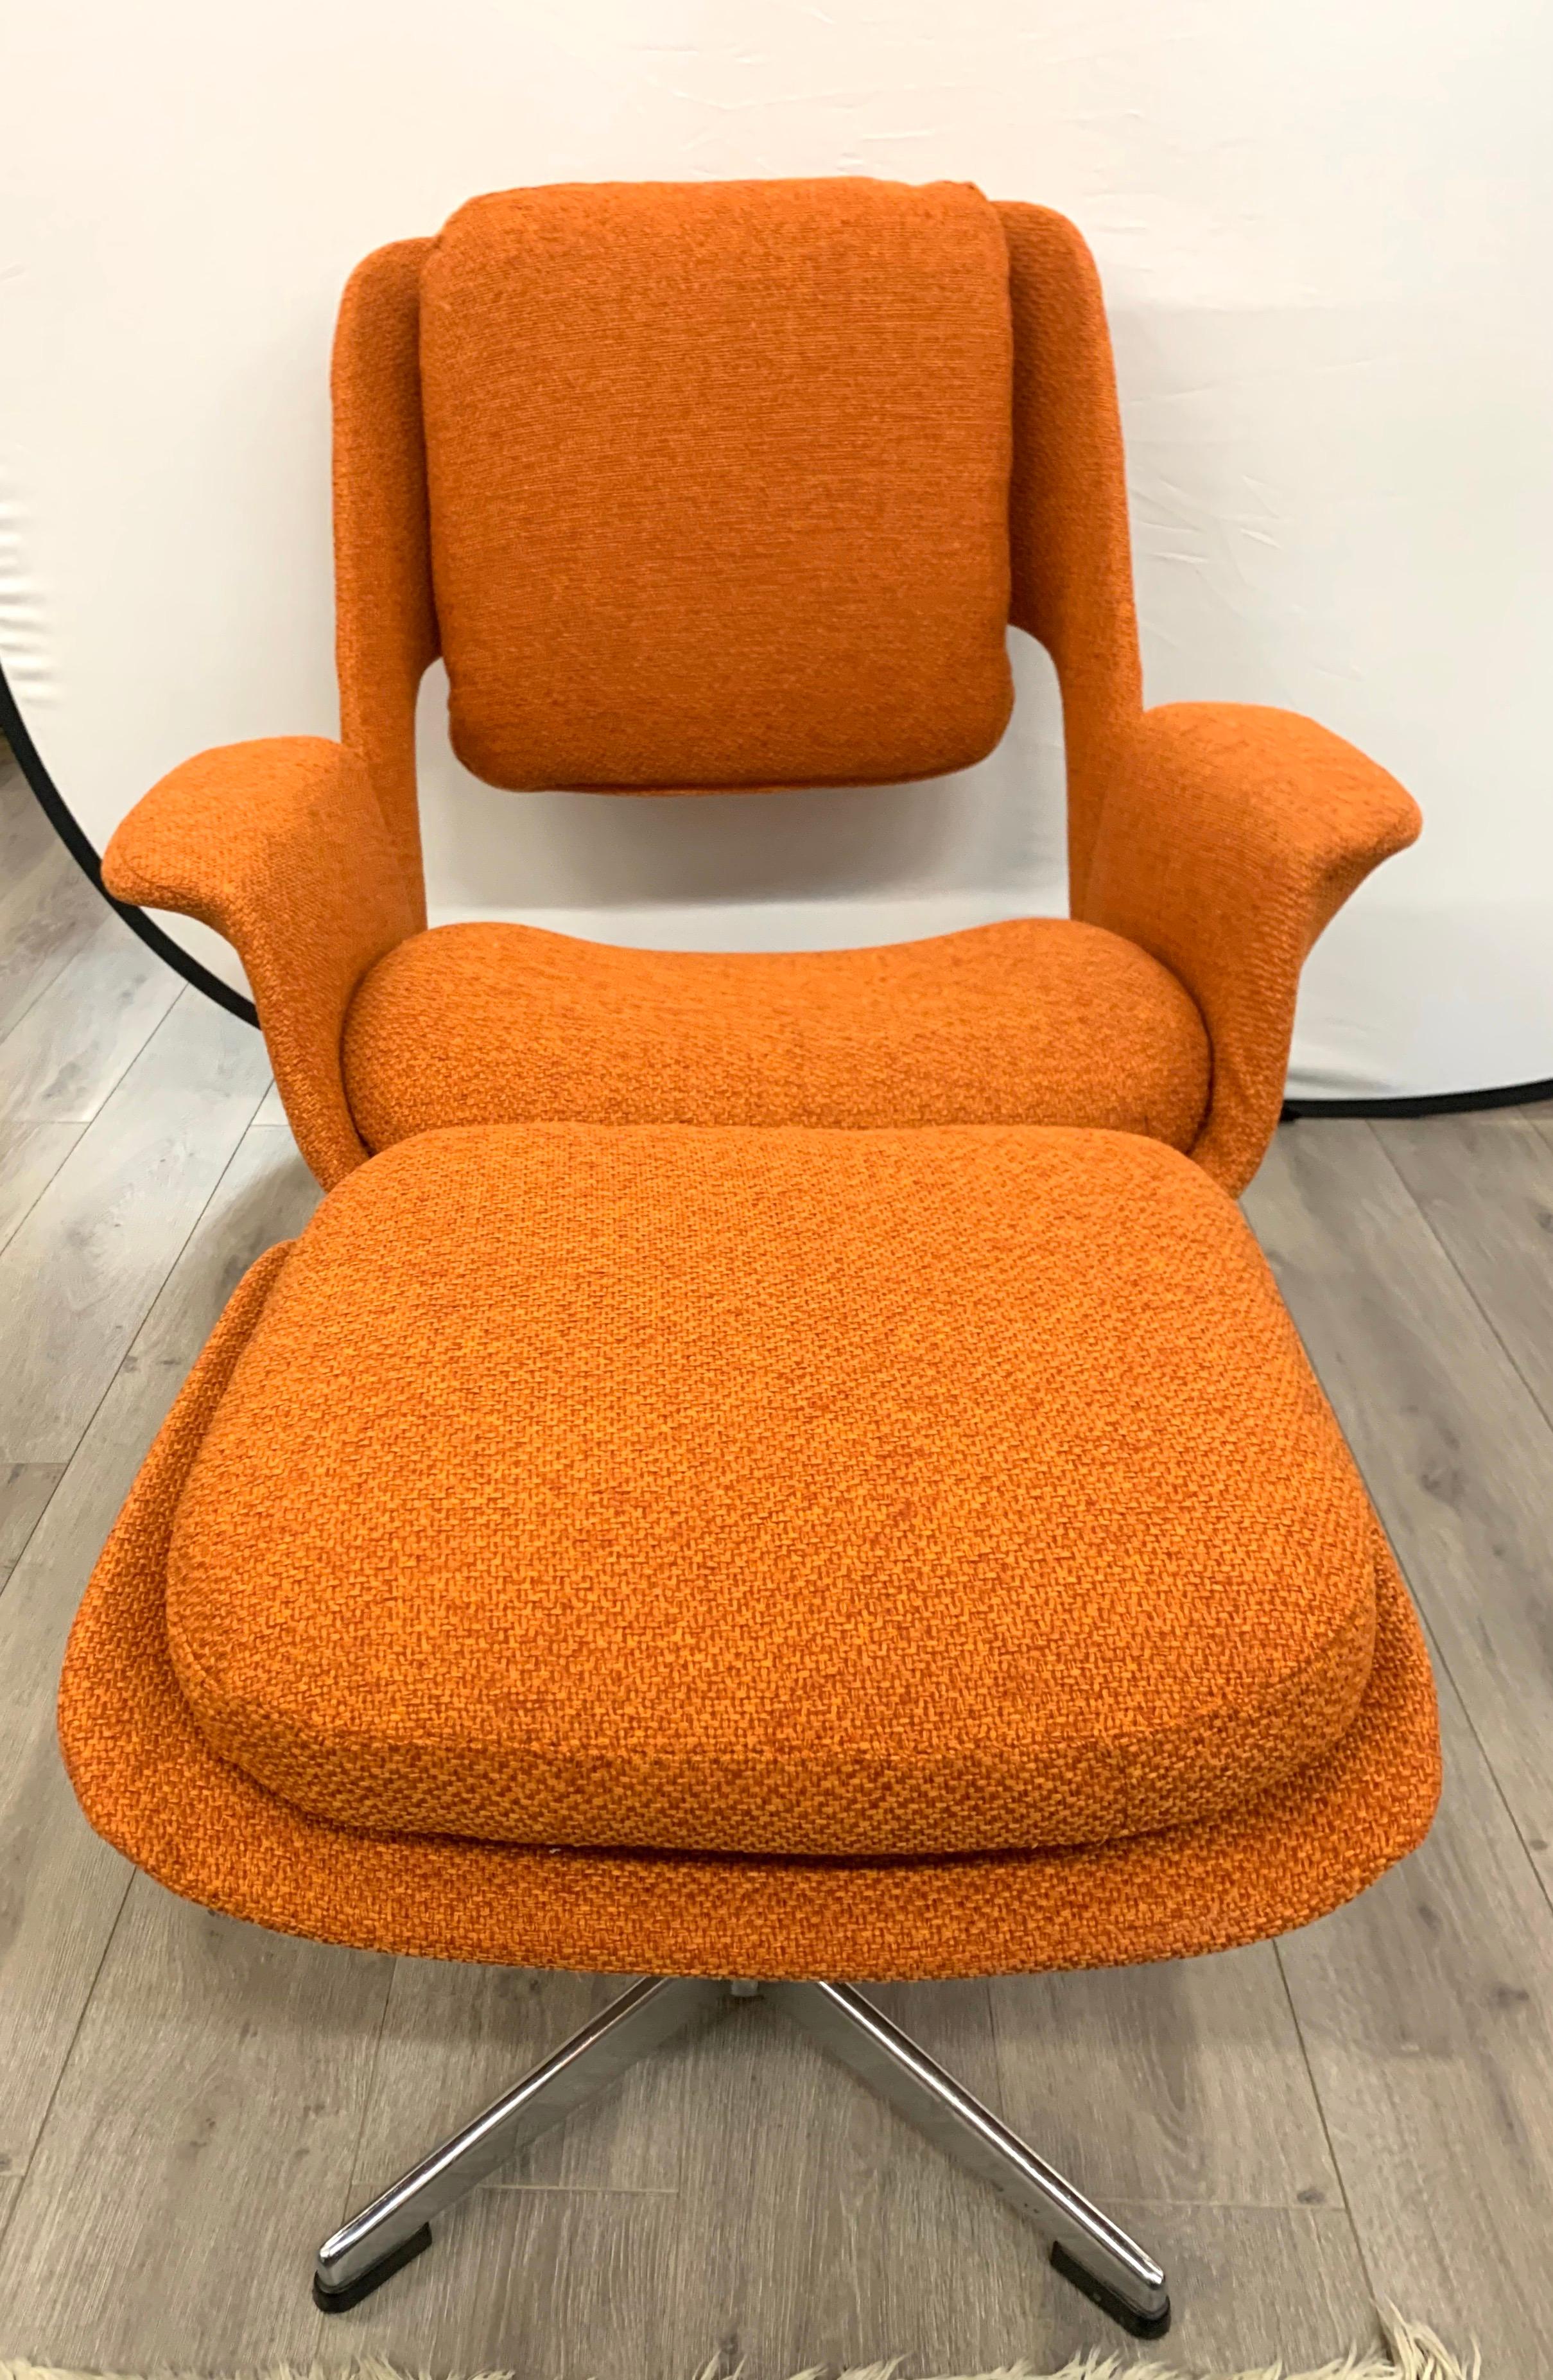 Magnificent Stendig midcentury swivel chair and ottoman set that has been just reupholstered in a Hermes orange colored fabric. The ottoman's dimensions are 22 x 19 x 17 tall and the chairs dimensions are below. Condition is mint. Lovely scale and